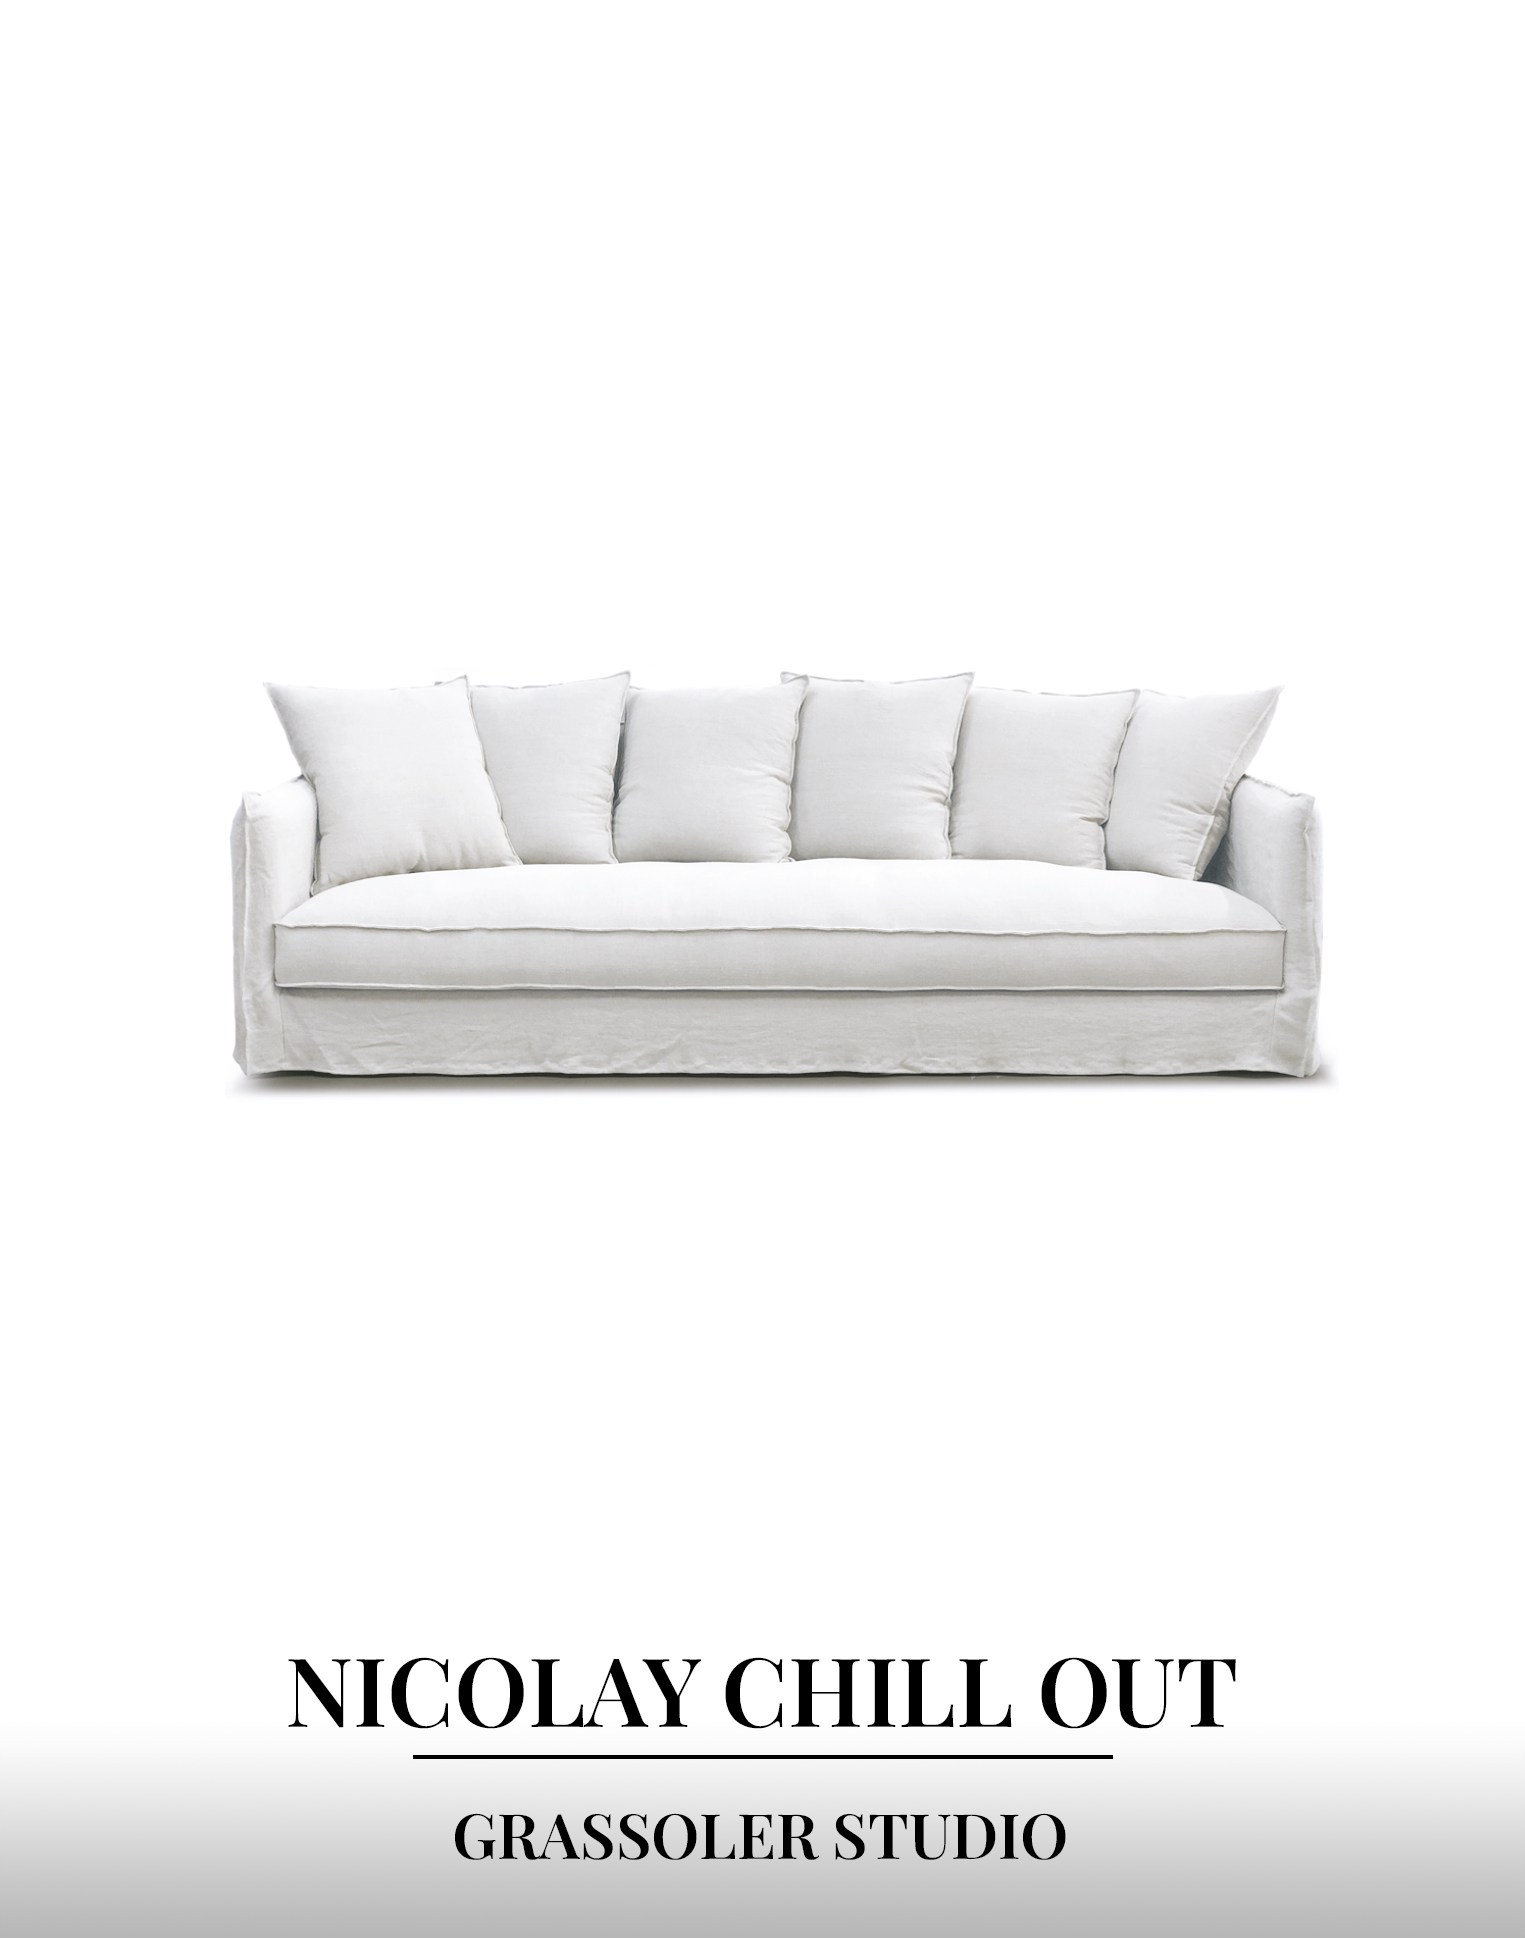 Nicolay Chill Out